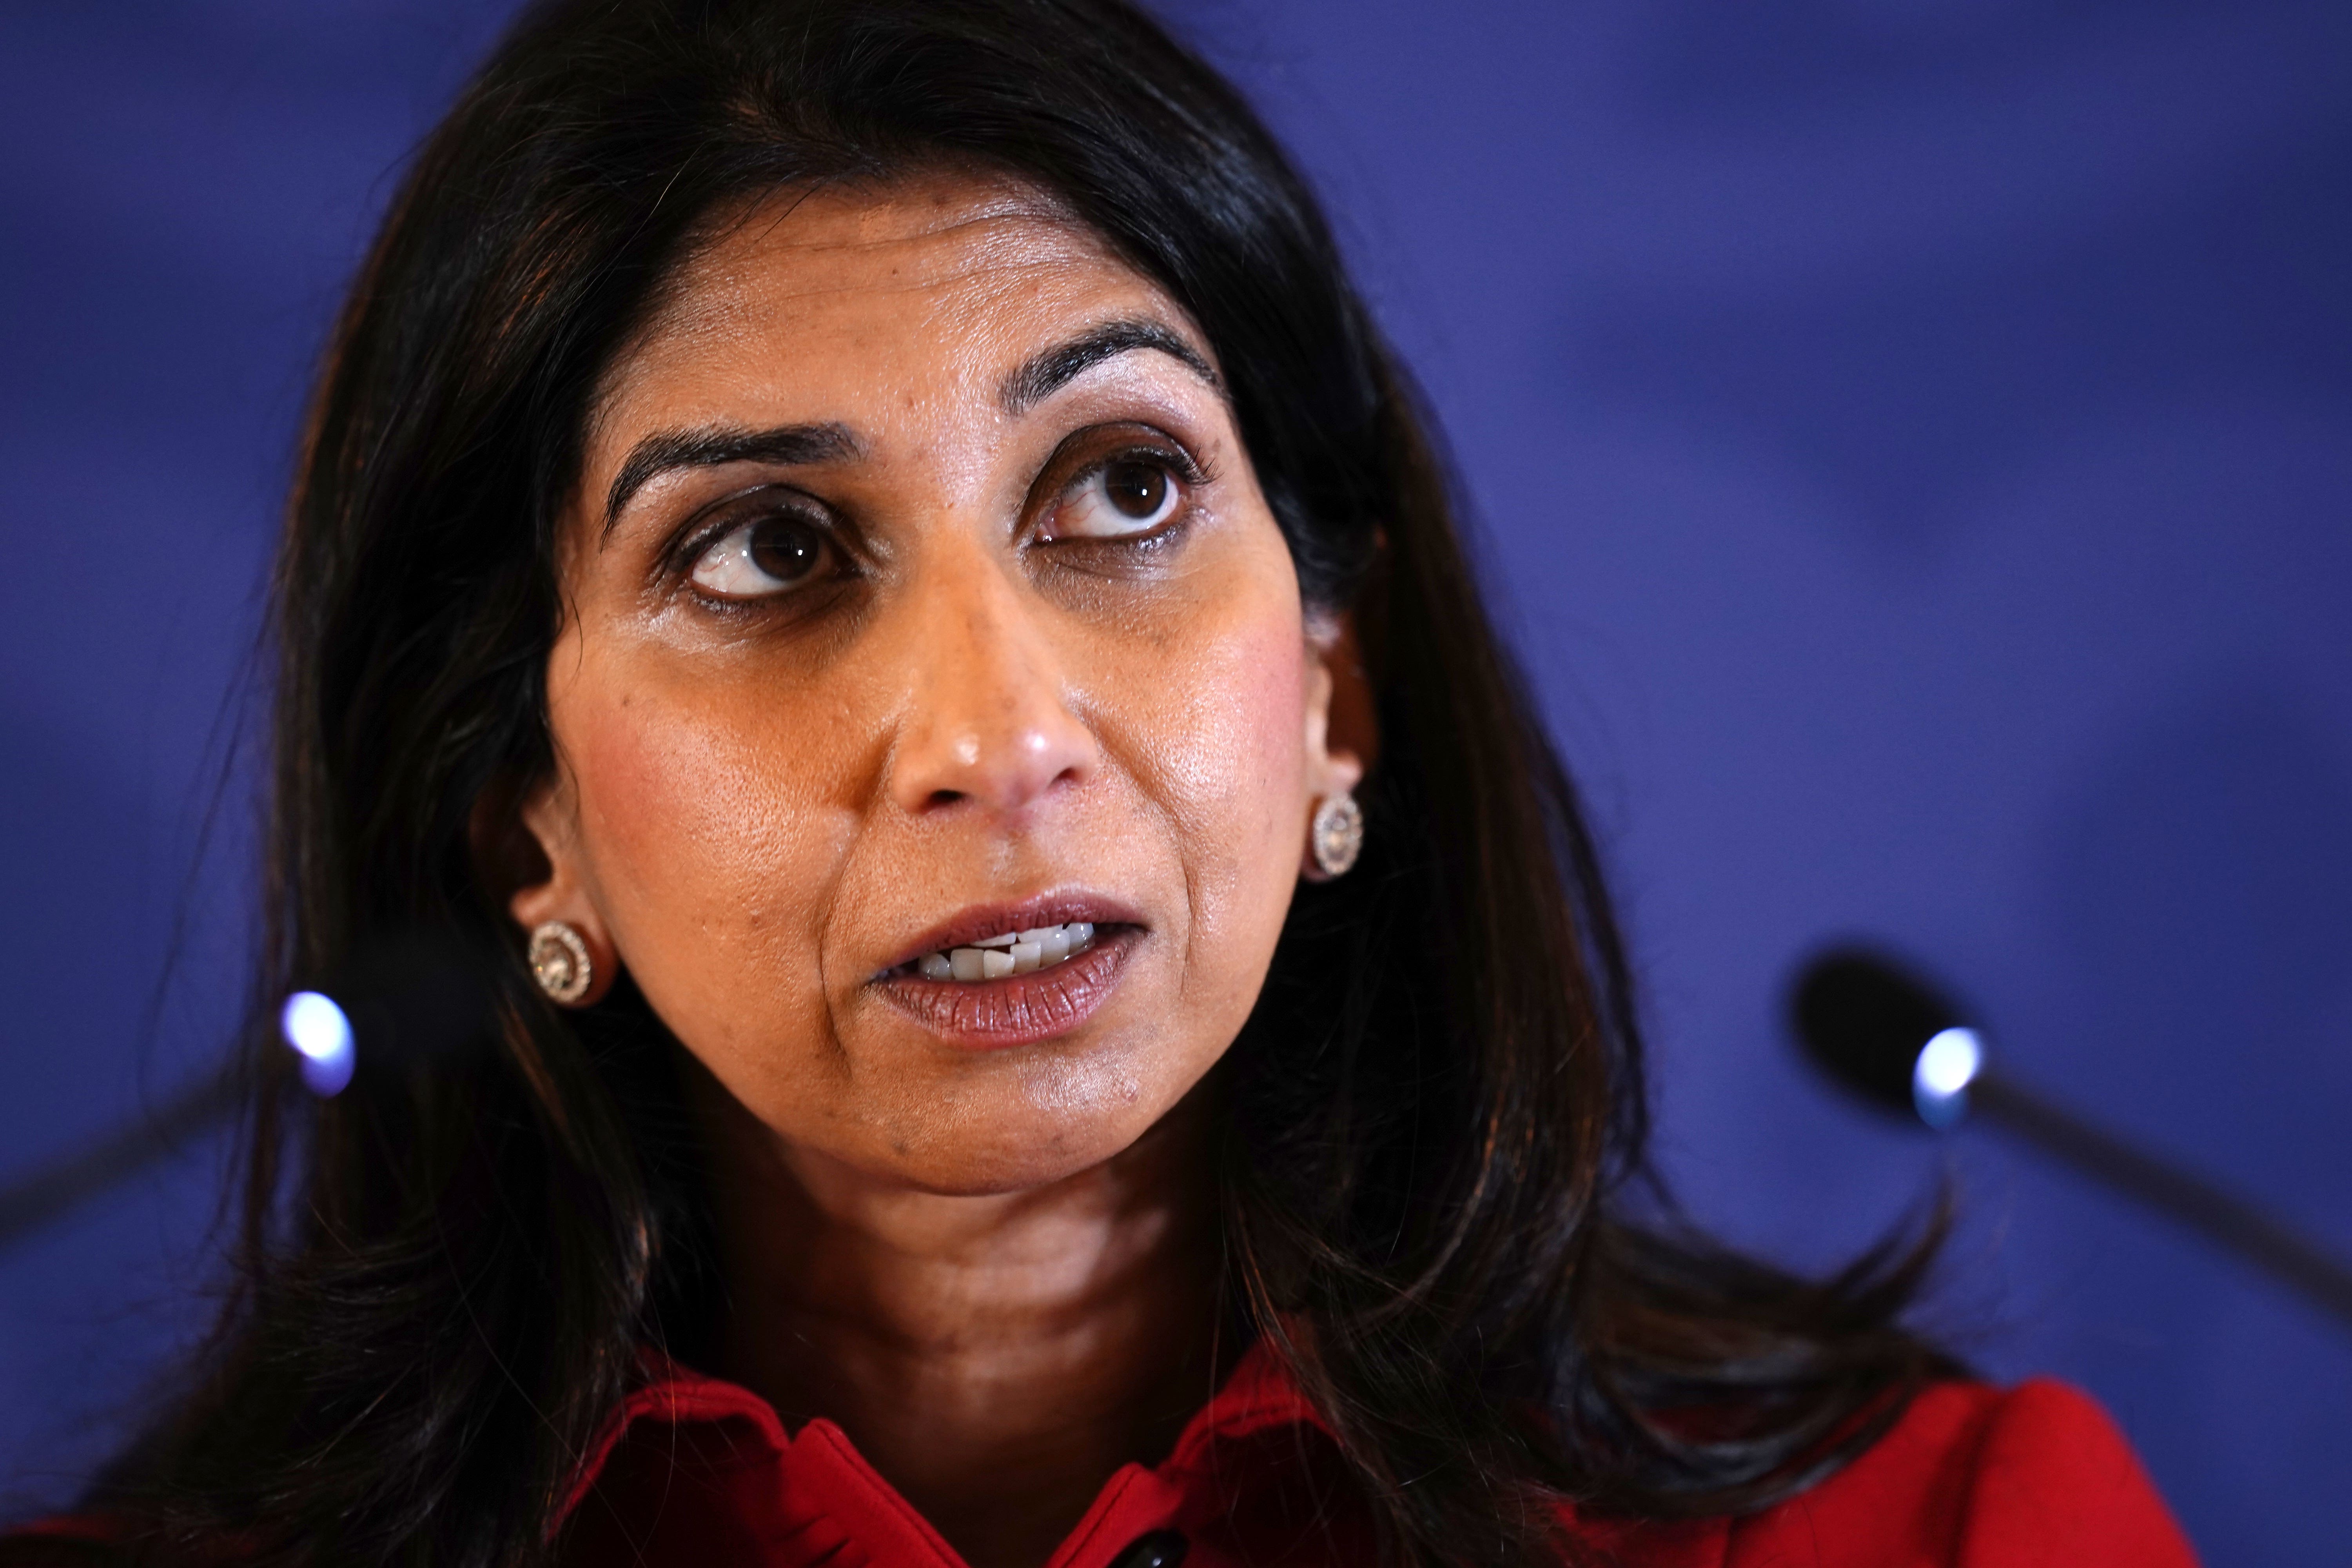 Home Secretary Suella Braverman is under fire from all sides after accusing police of bias (Jordan Pettitt, PA)